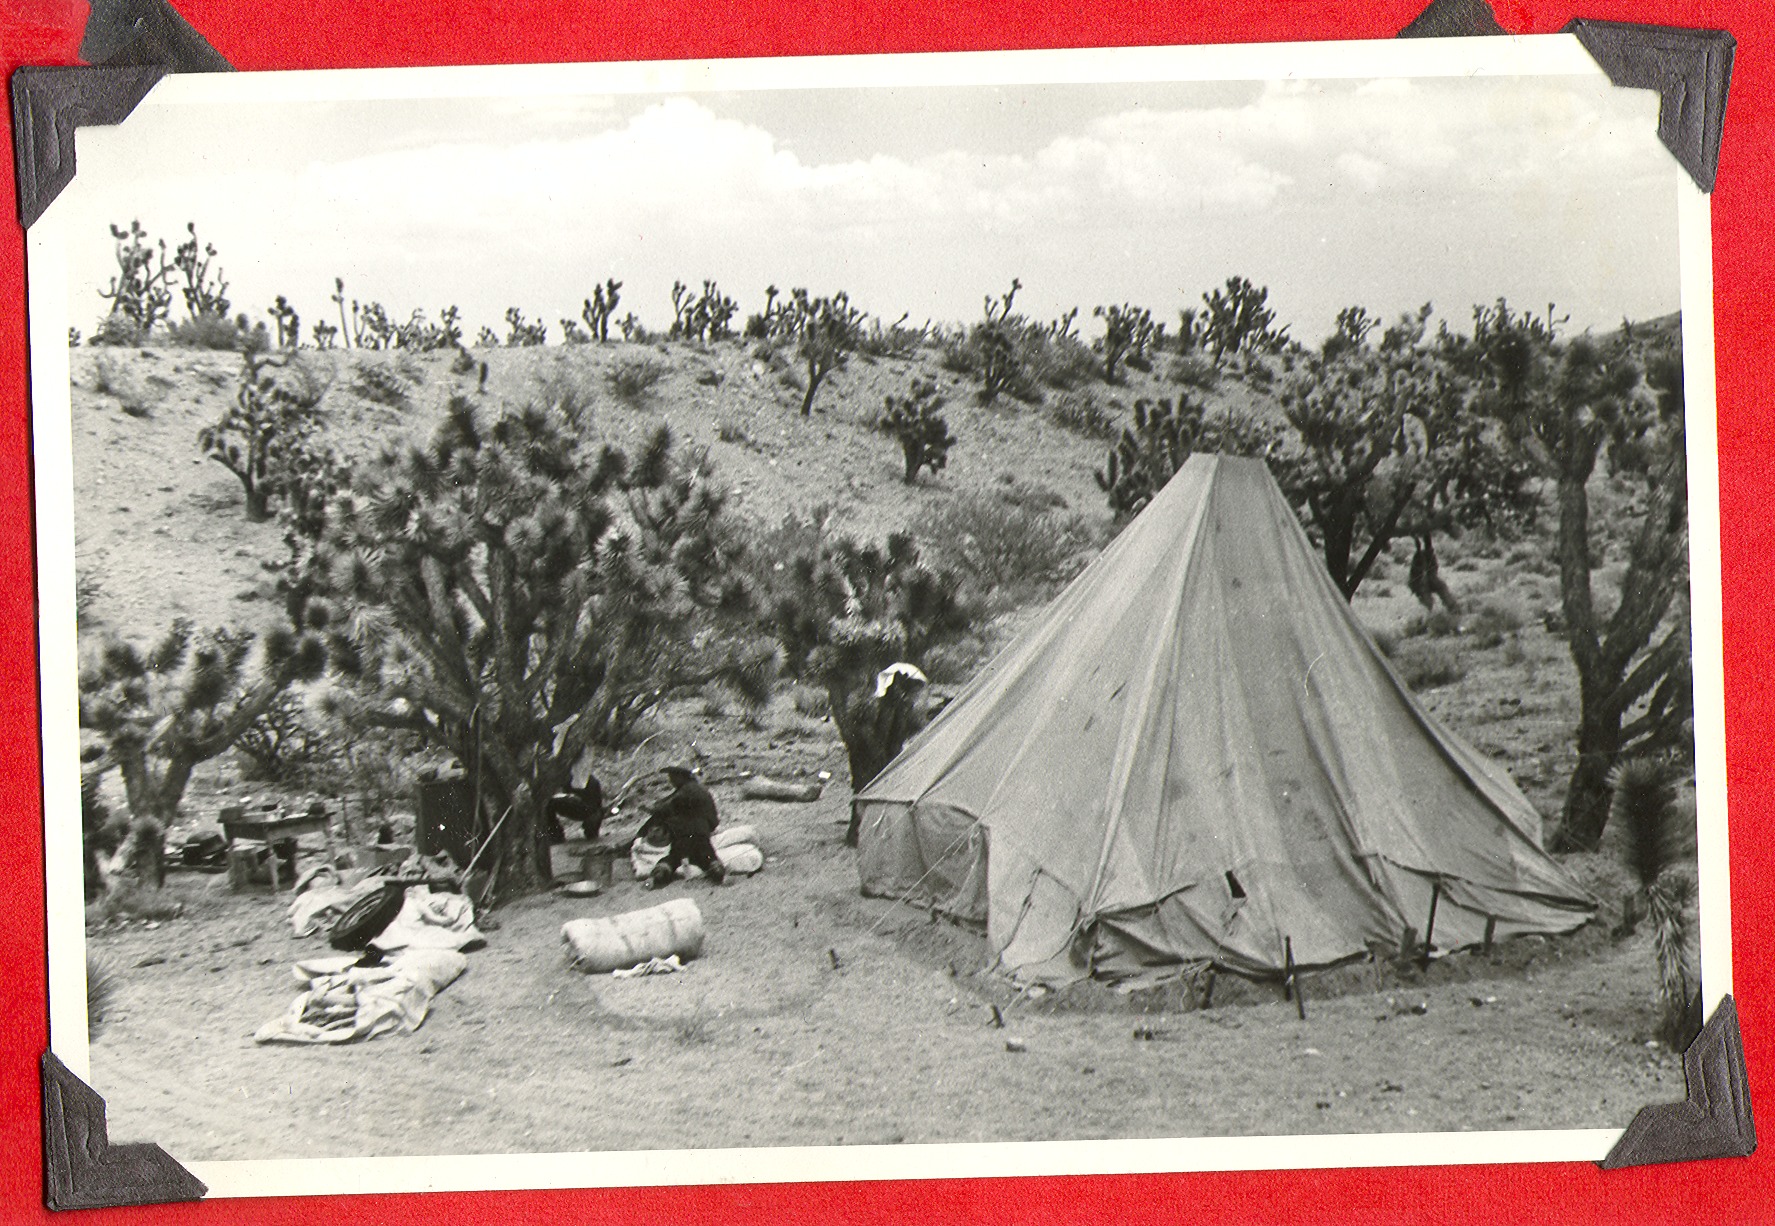 Miners' tent on the ranch: photographic print